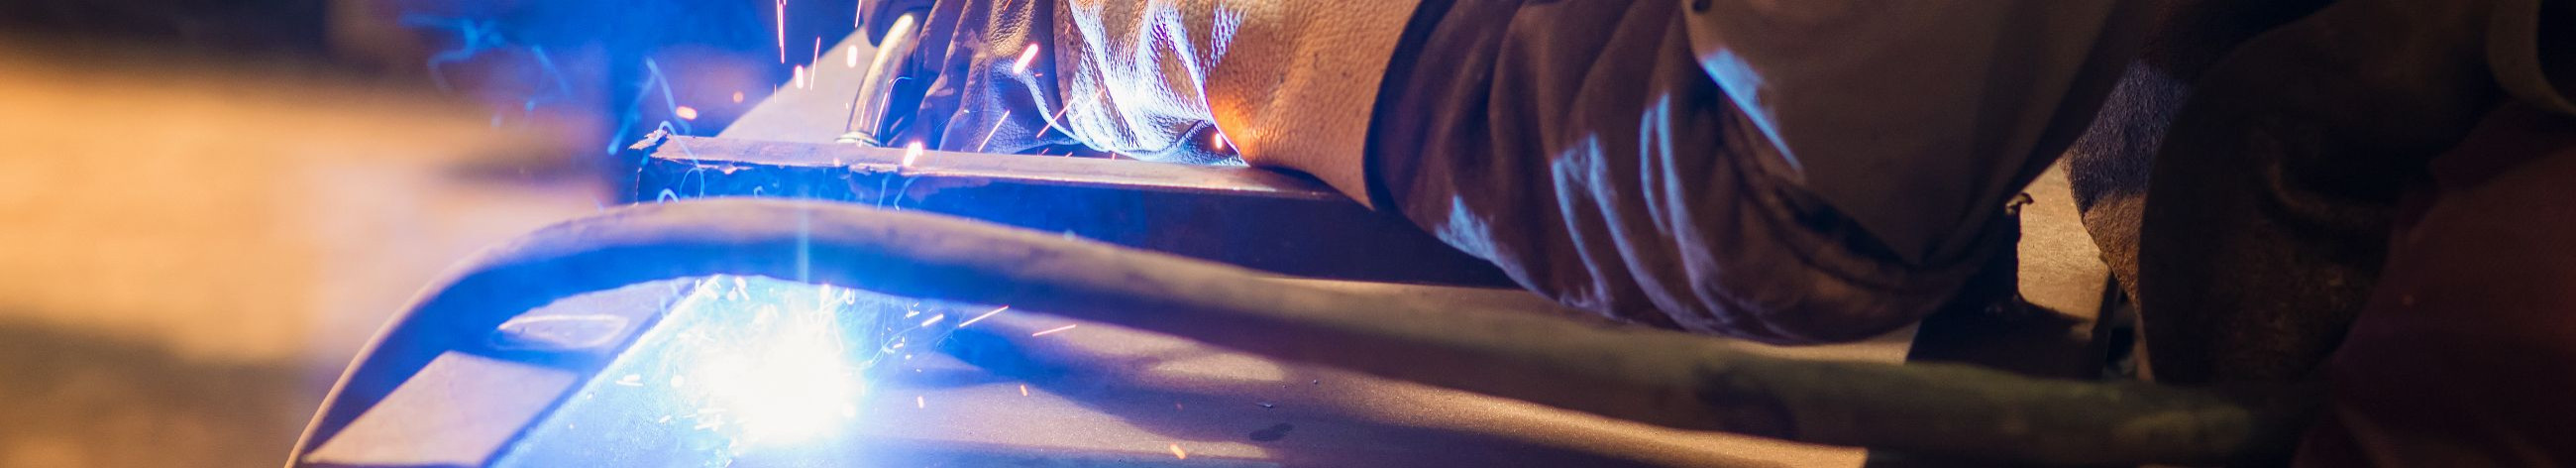 We specialize in welding training, machinework, and pressure equipment works, fostering innovation and quality assurance.